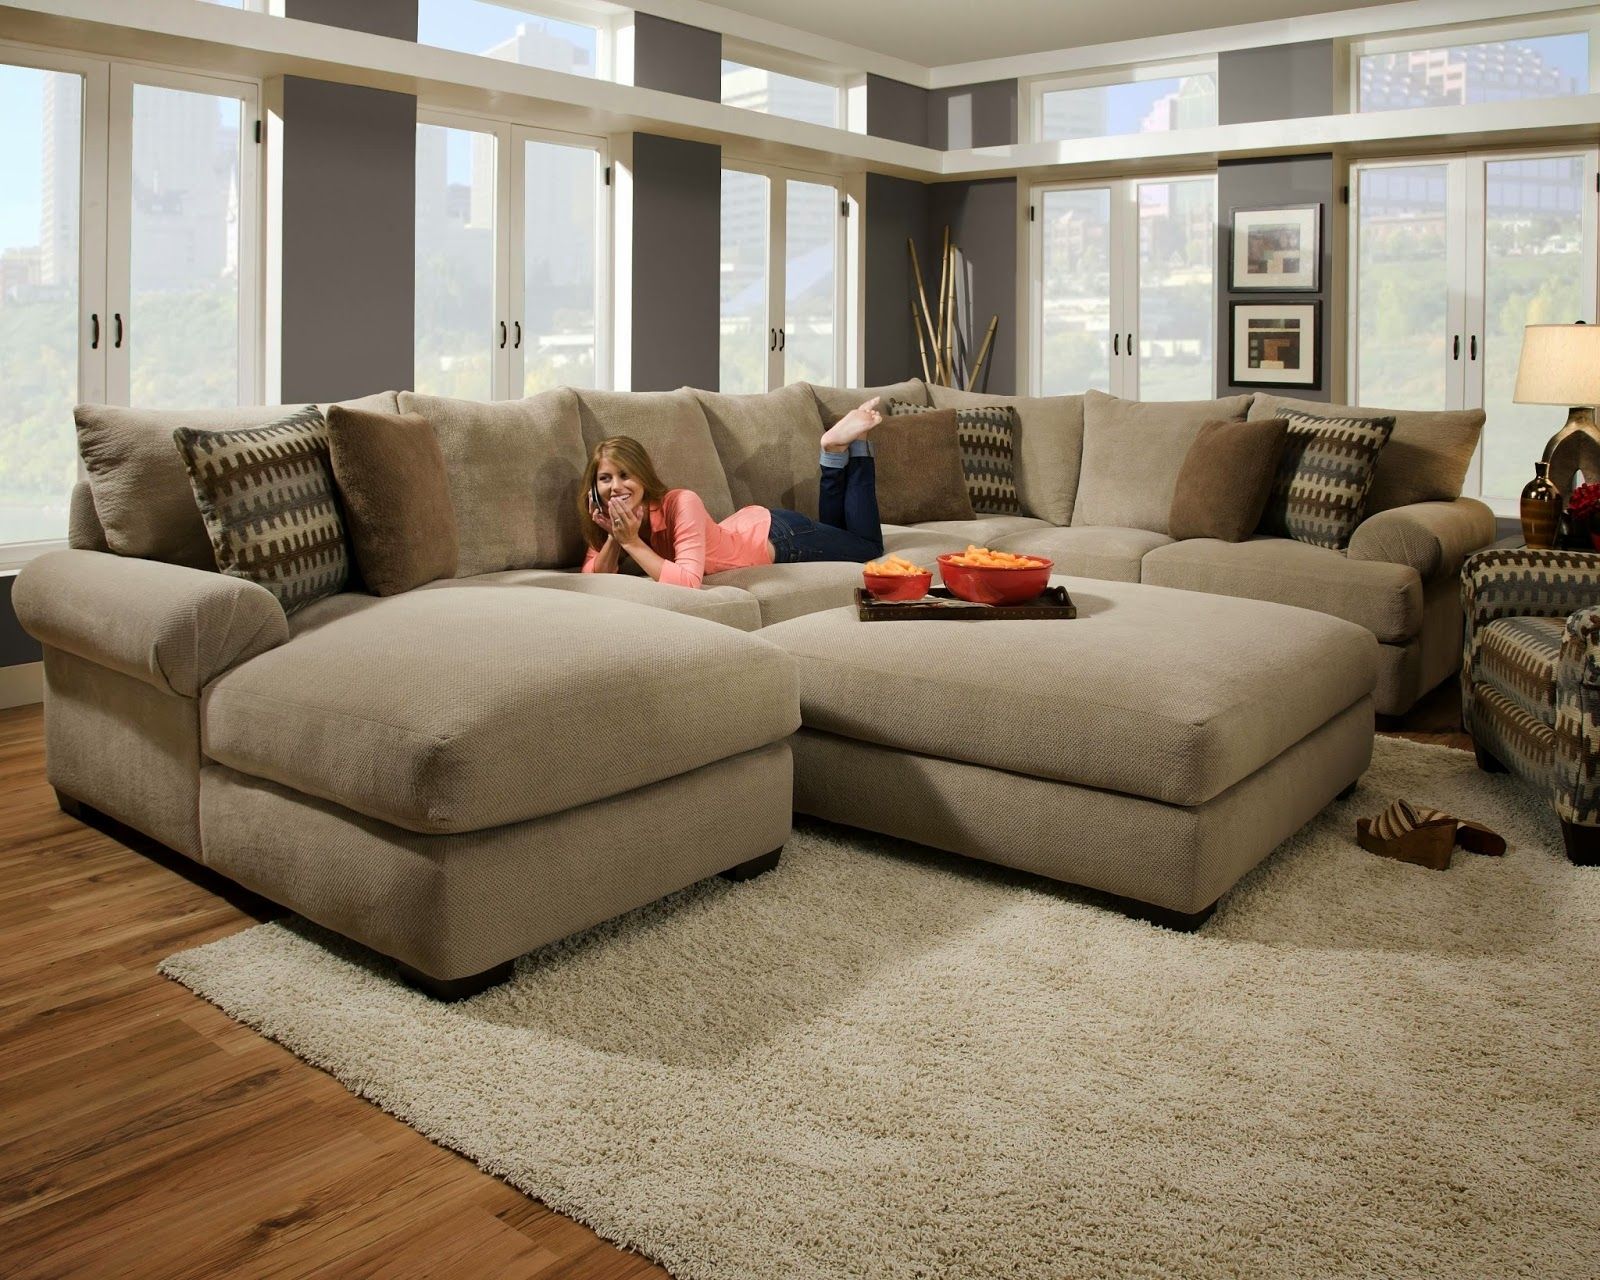 Sectional Sofa With Ottoman Foter Within Sofas With Ottomans In Brown 